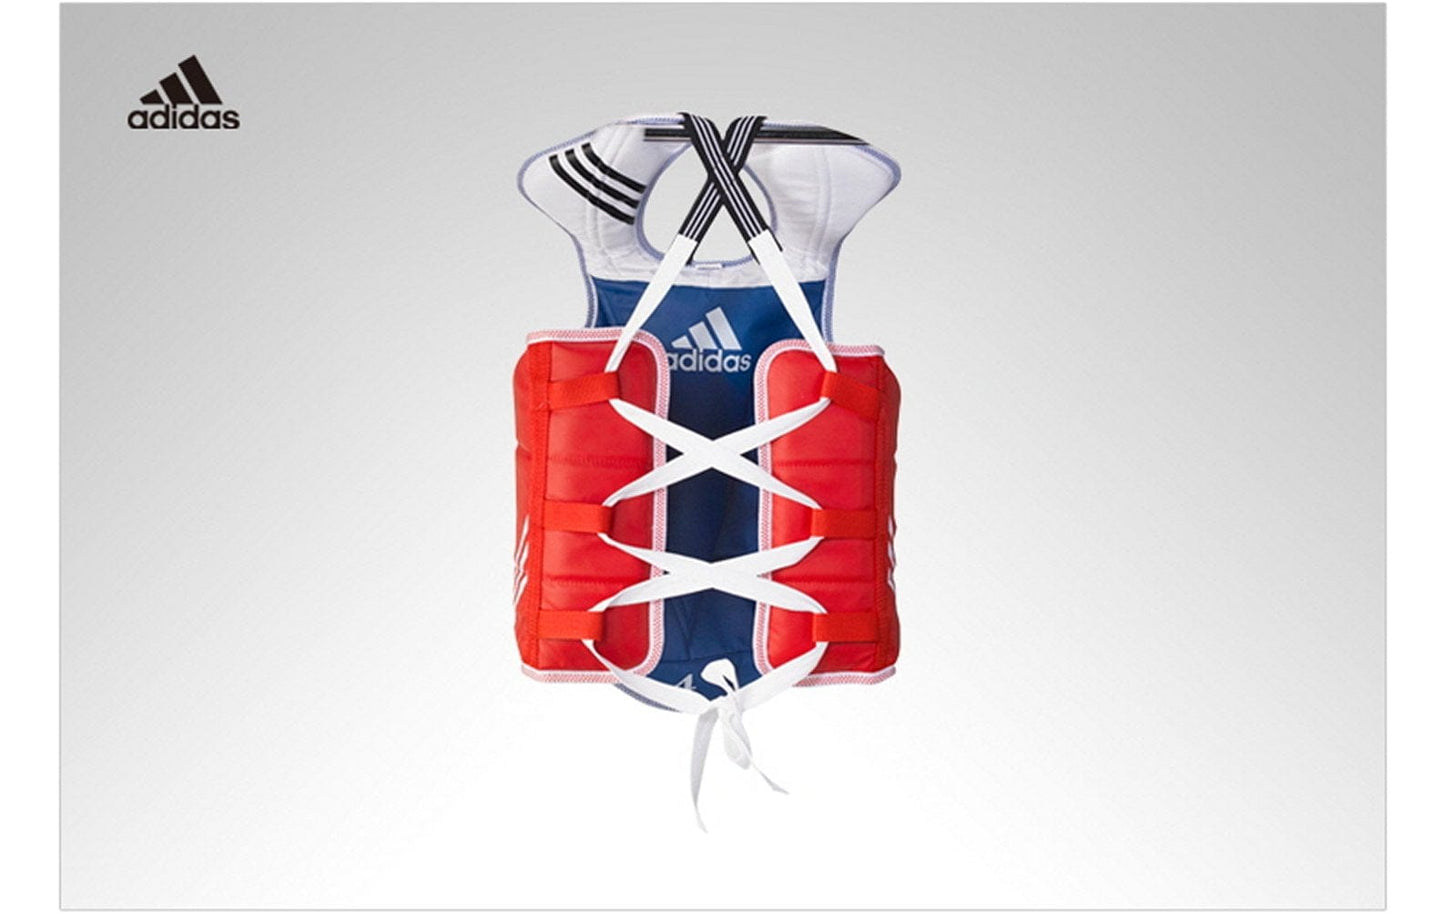 Adidas sporting goods 1 ADIDAS NEW BODY PROTECTOR WTF approved